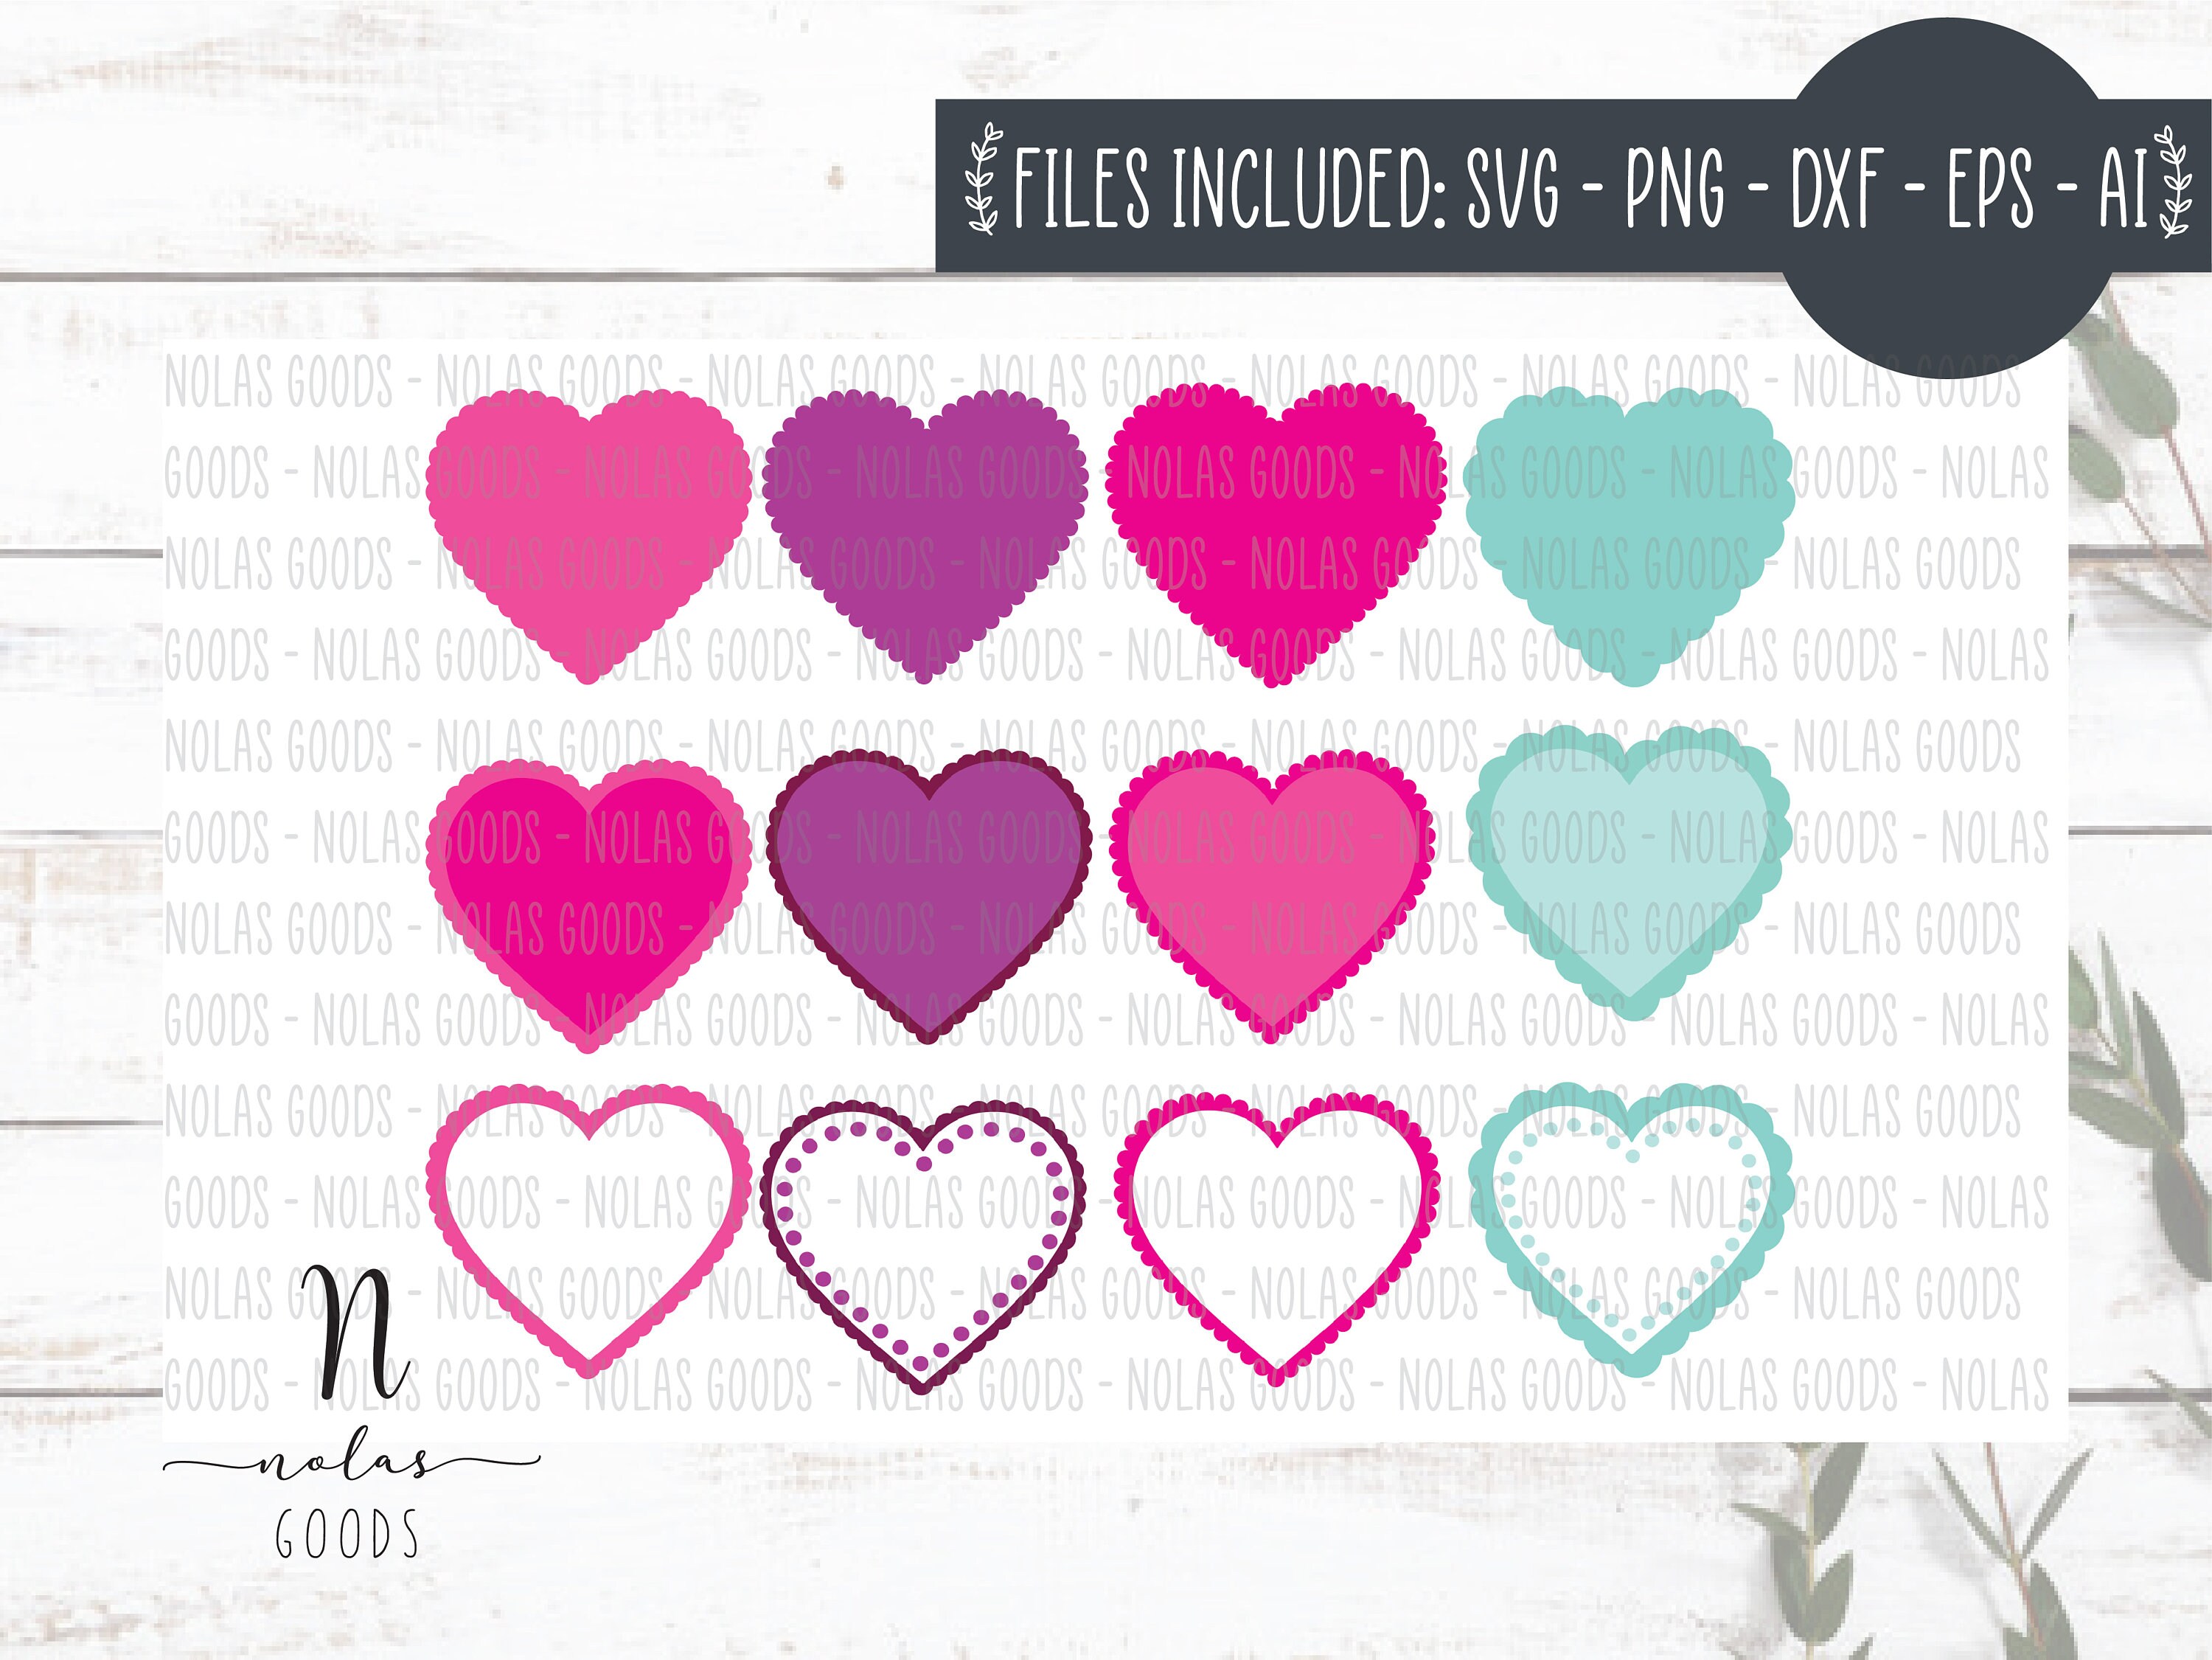 double heart stamp SVG SCA 20 –